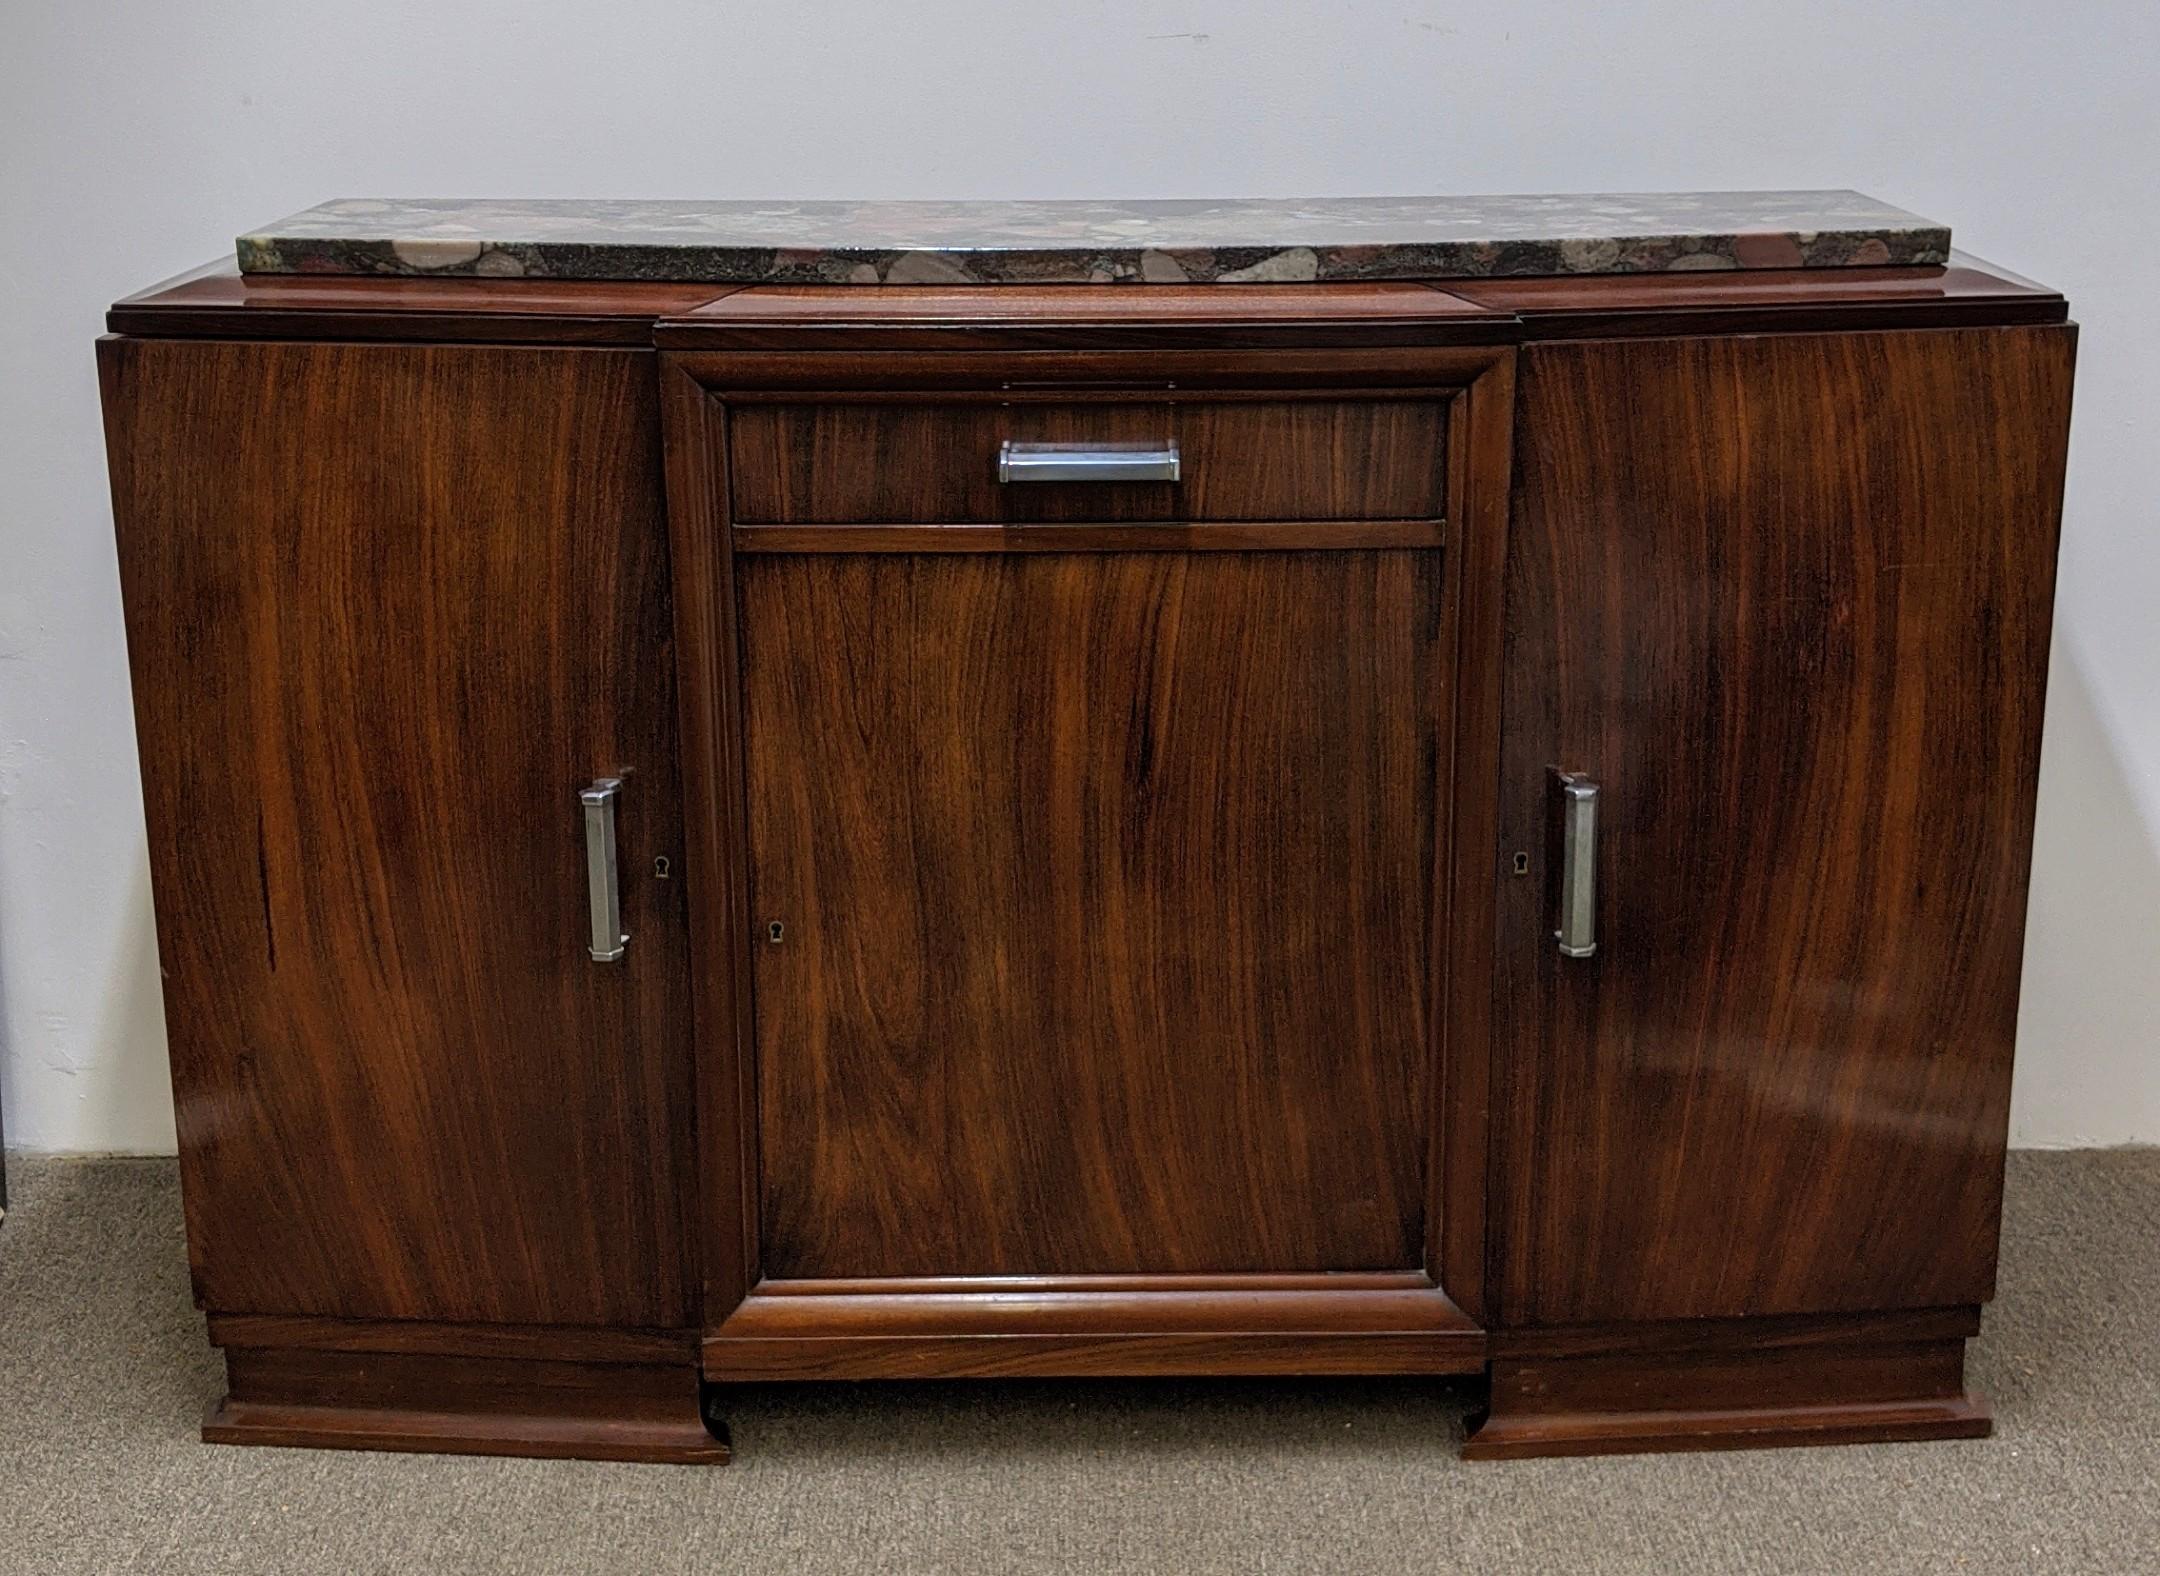 French Art Deco sideboard in walnut veneer marble top with Nickel hardware. Geometric modern clean line design accommodating three doors with a central draw. Need minor work. We are the rare source that specializes exclusively in French Art Deco for